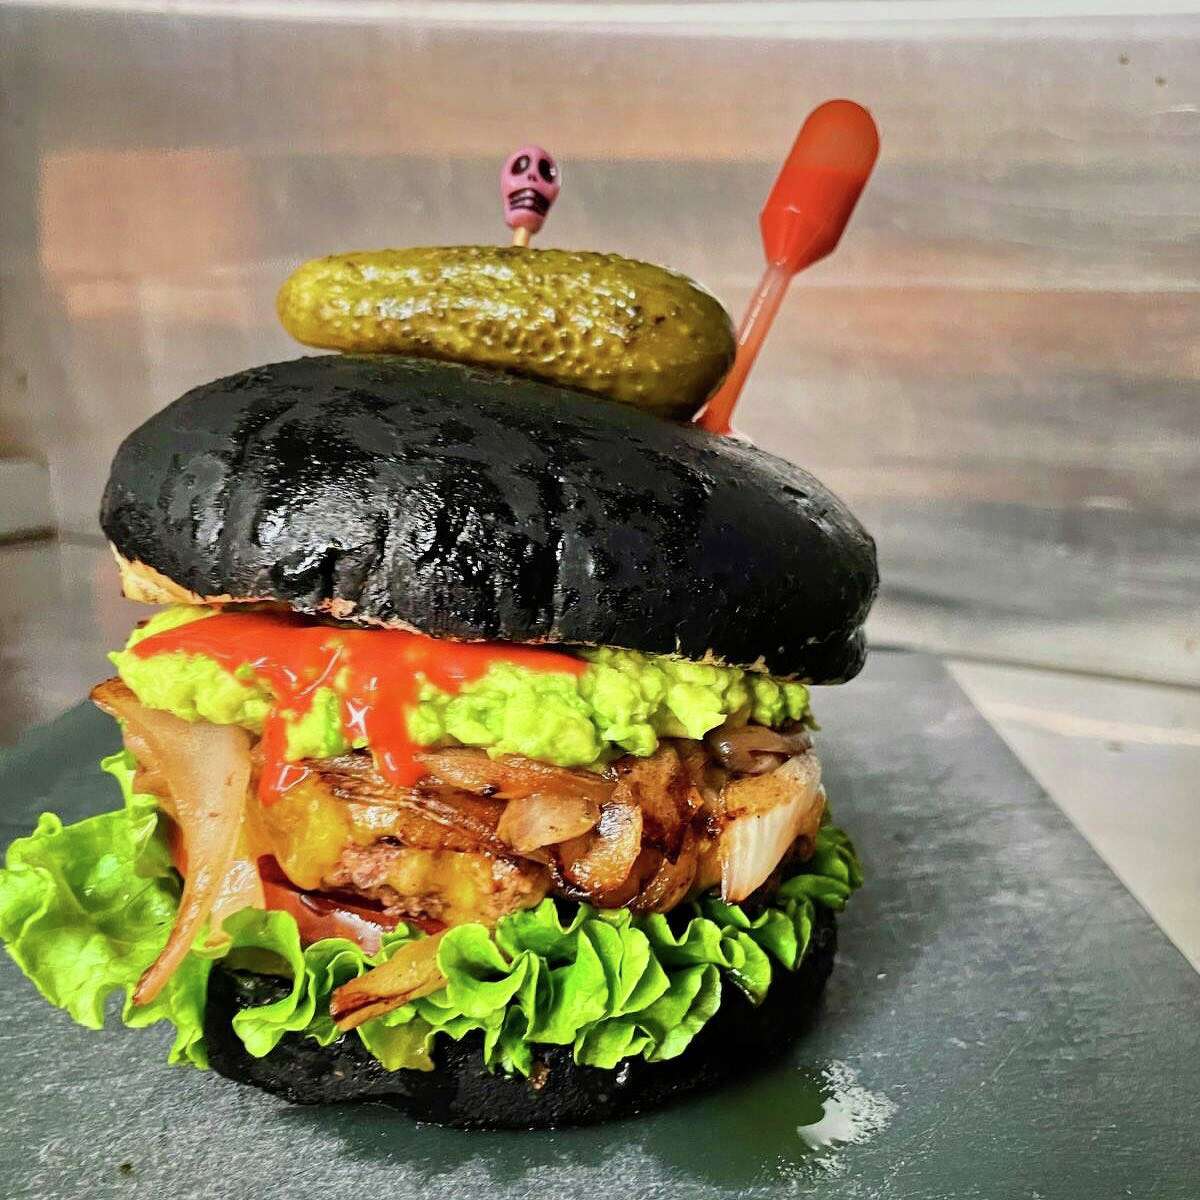 This photo from Nomada Food Truck's Faceboook shows the Halloween burger the truck will be selling on October 30.